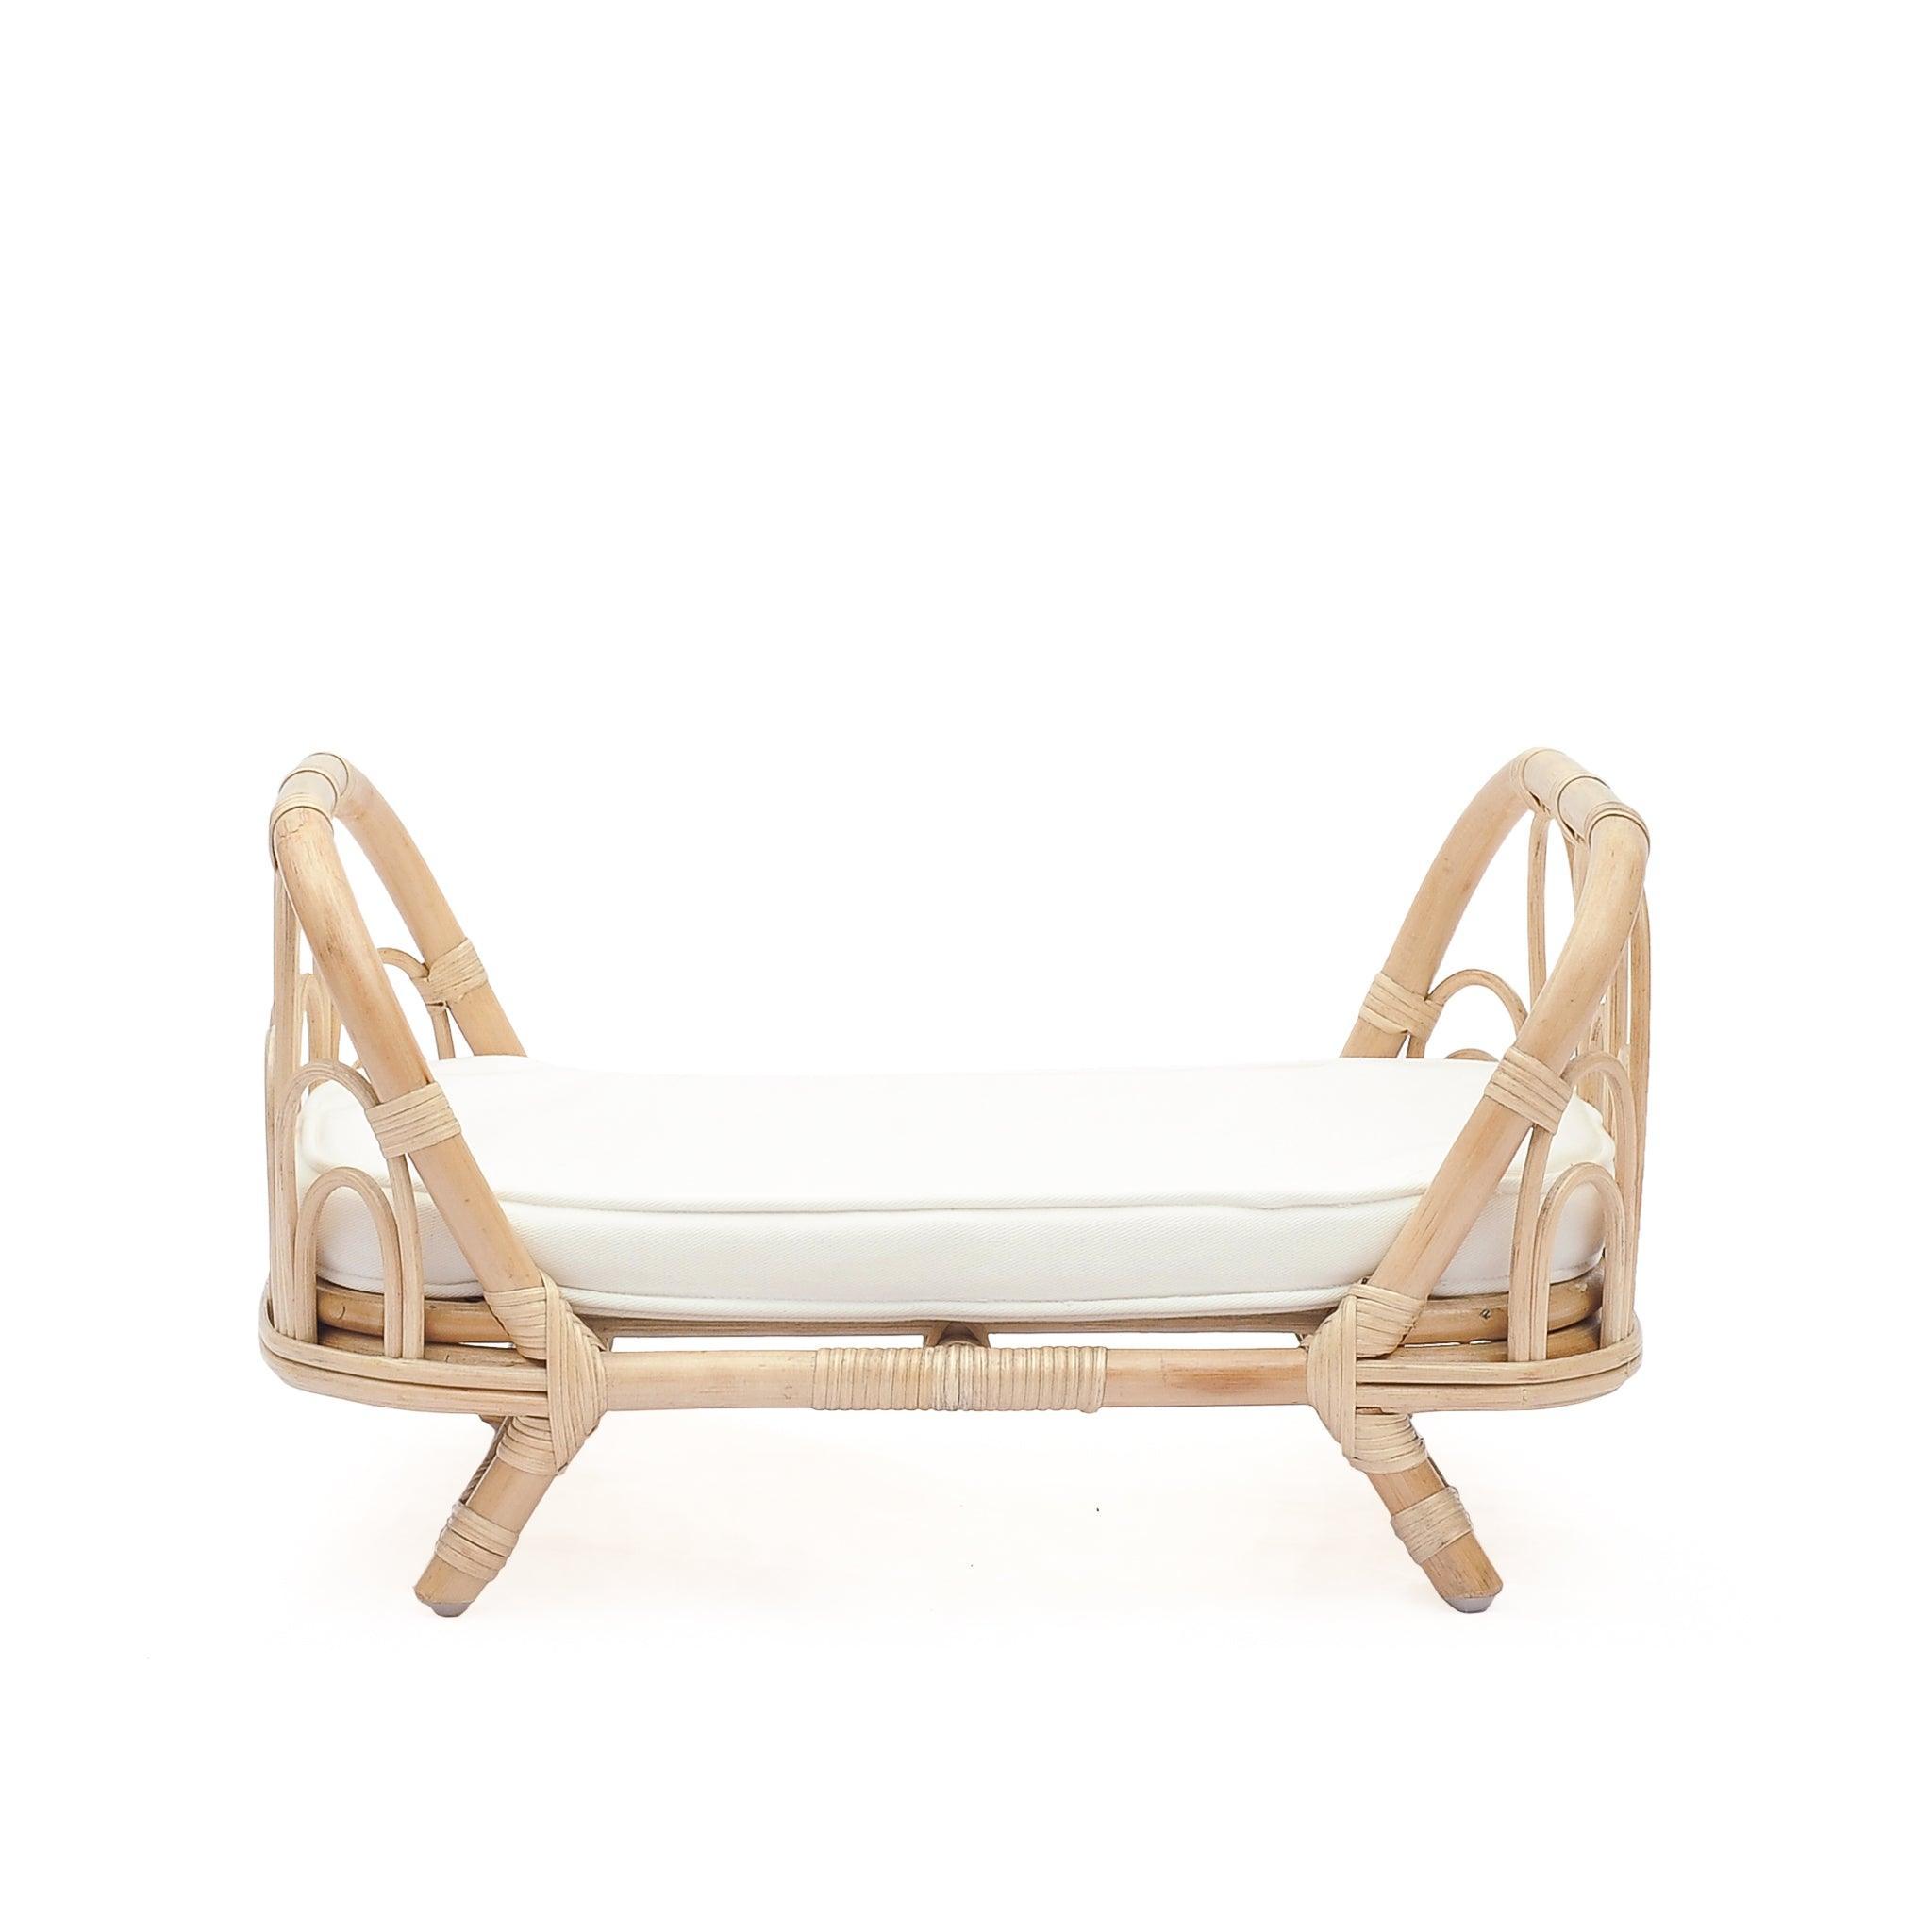 Quinn Doll Daybed - Why and Whale